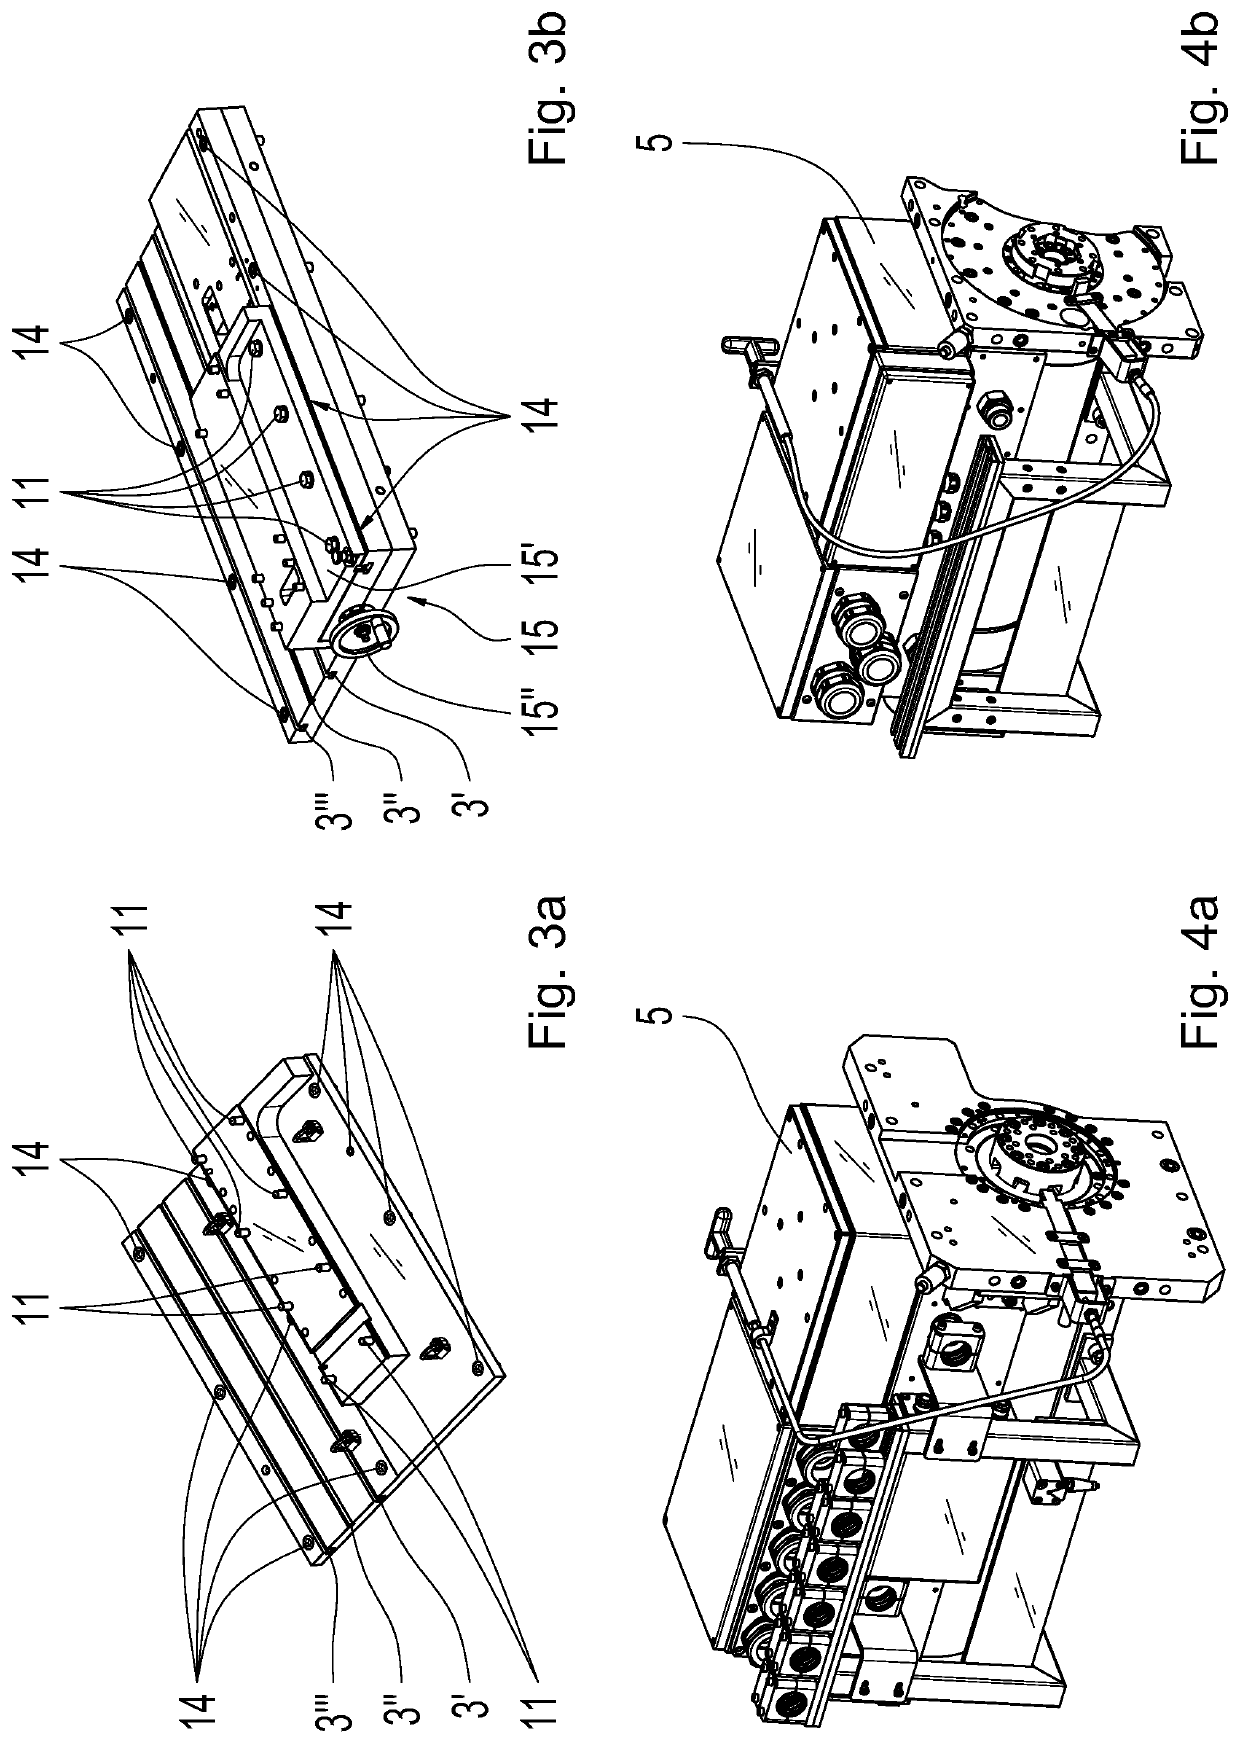 Sub-assembly for a drive unit, drive unit, drive train test stand, and modular system